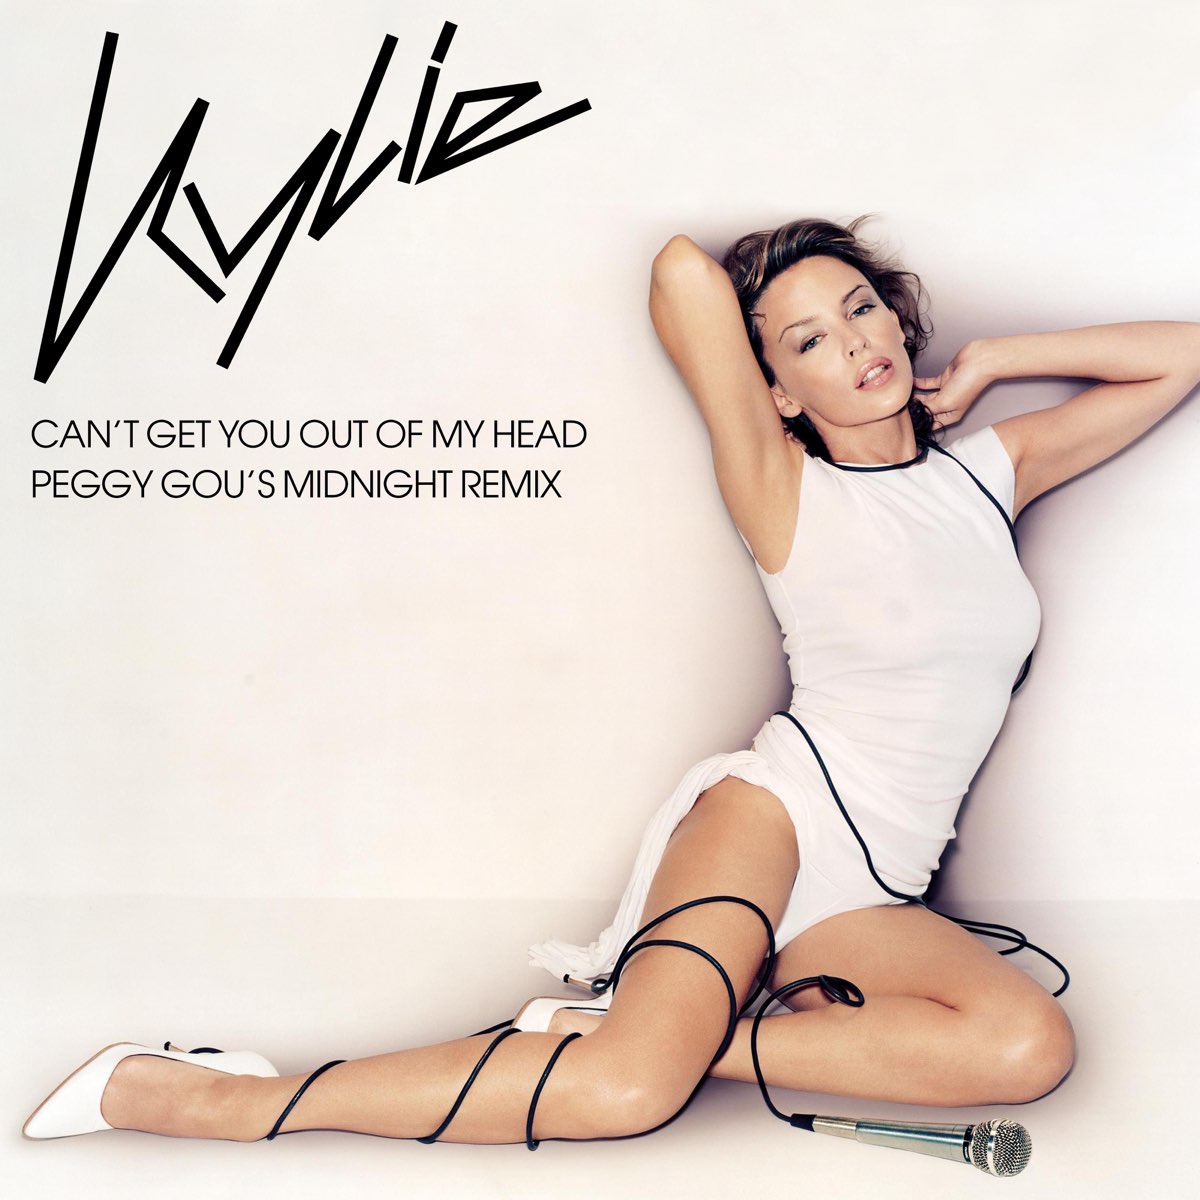 Dance you outta my head кэт. Kylie Minogue 2022. Kylie Minogue cant get you out of my head. Kylie Minogue can't get. Kylie Minogue can't get you out of my.